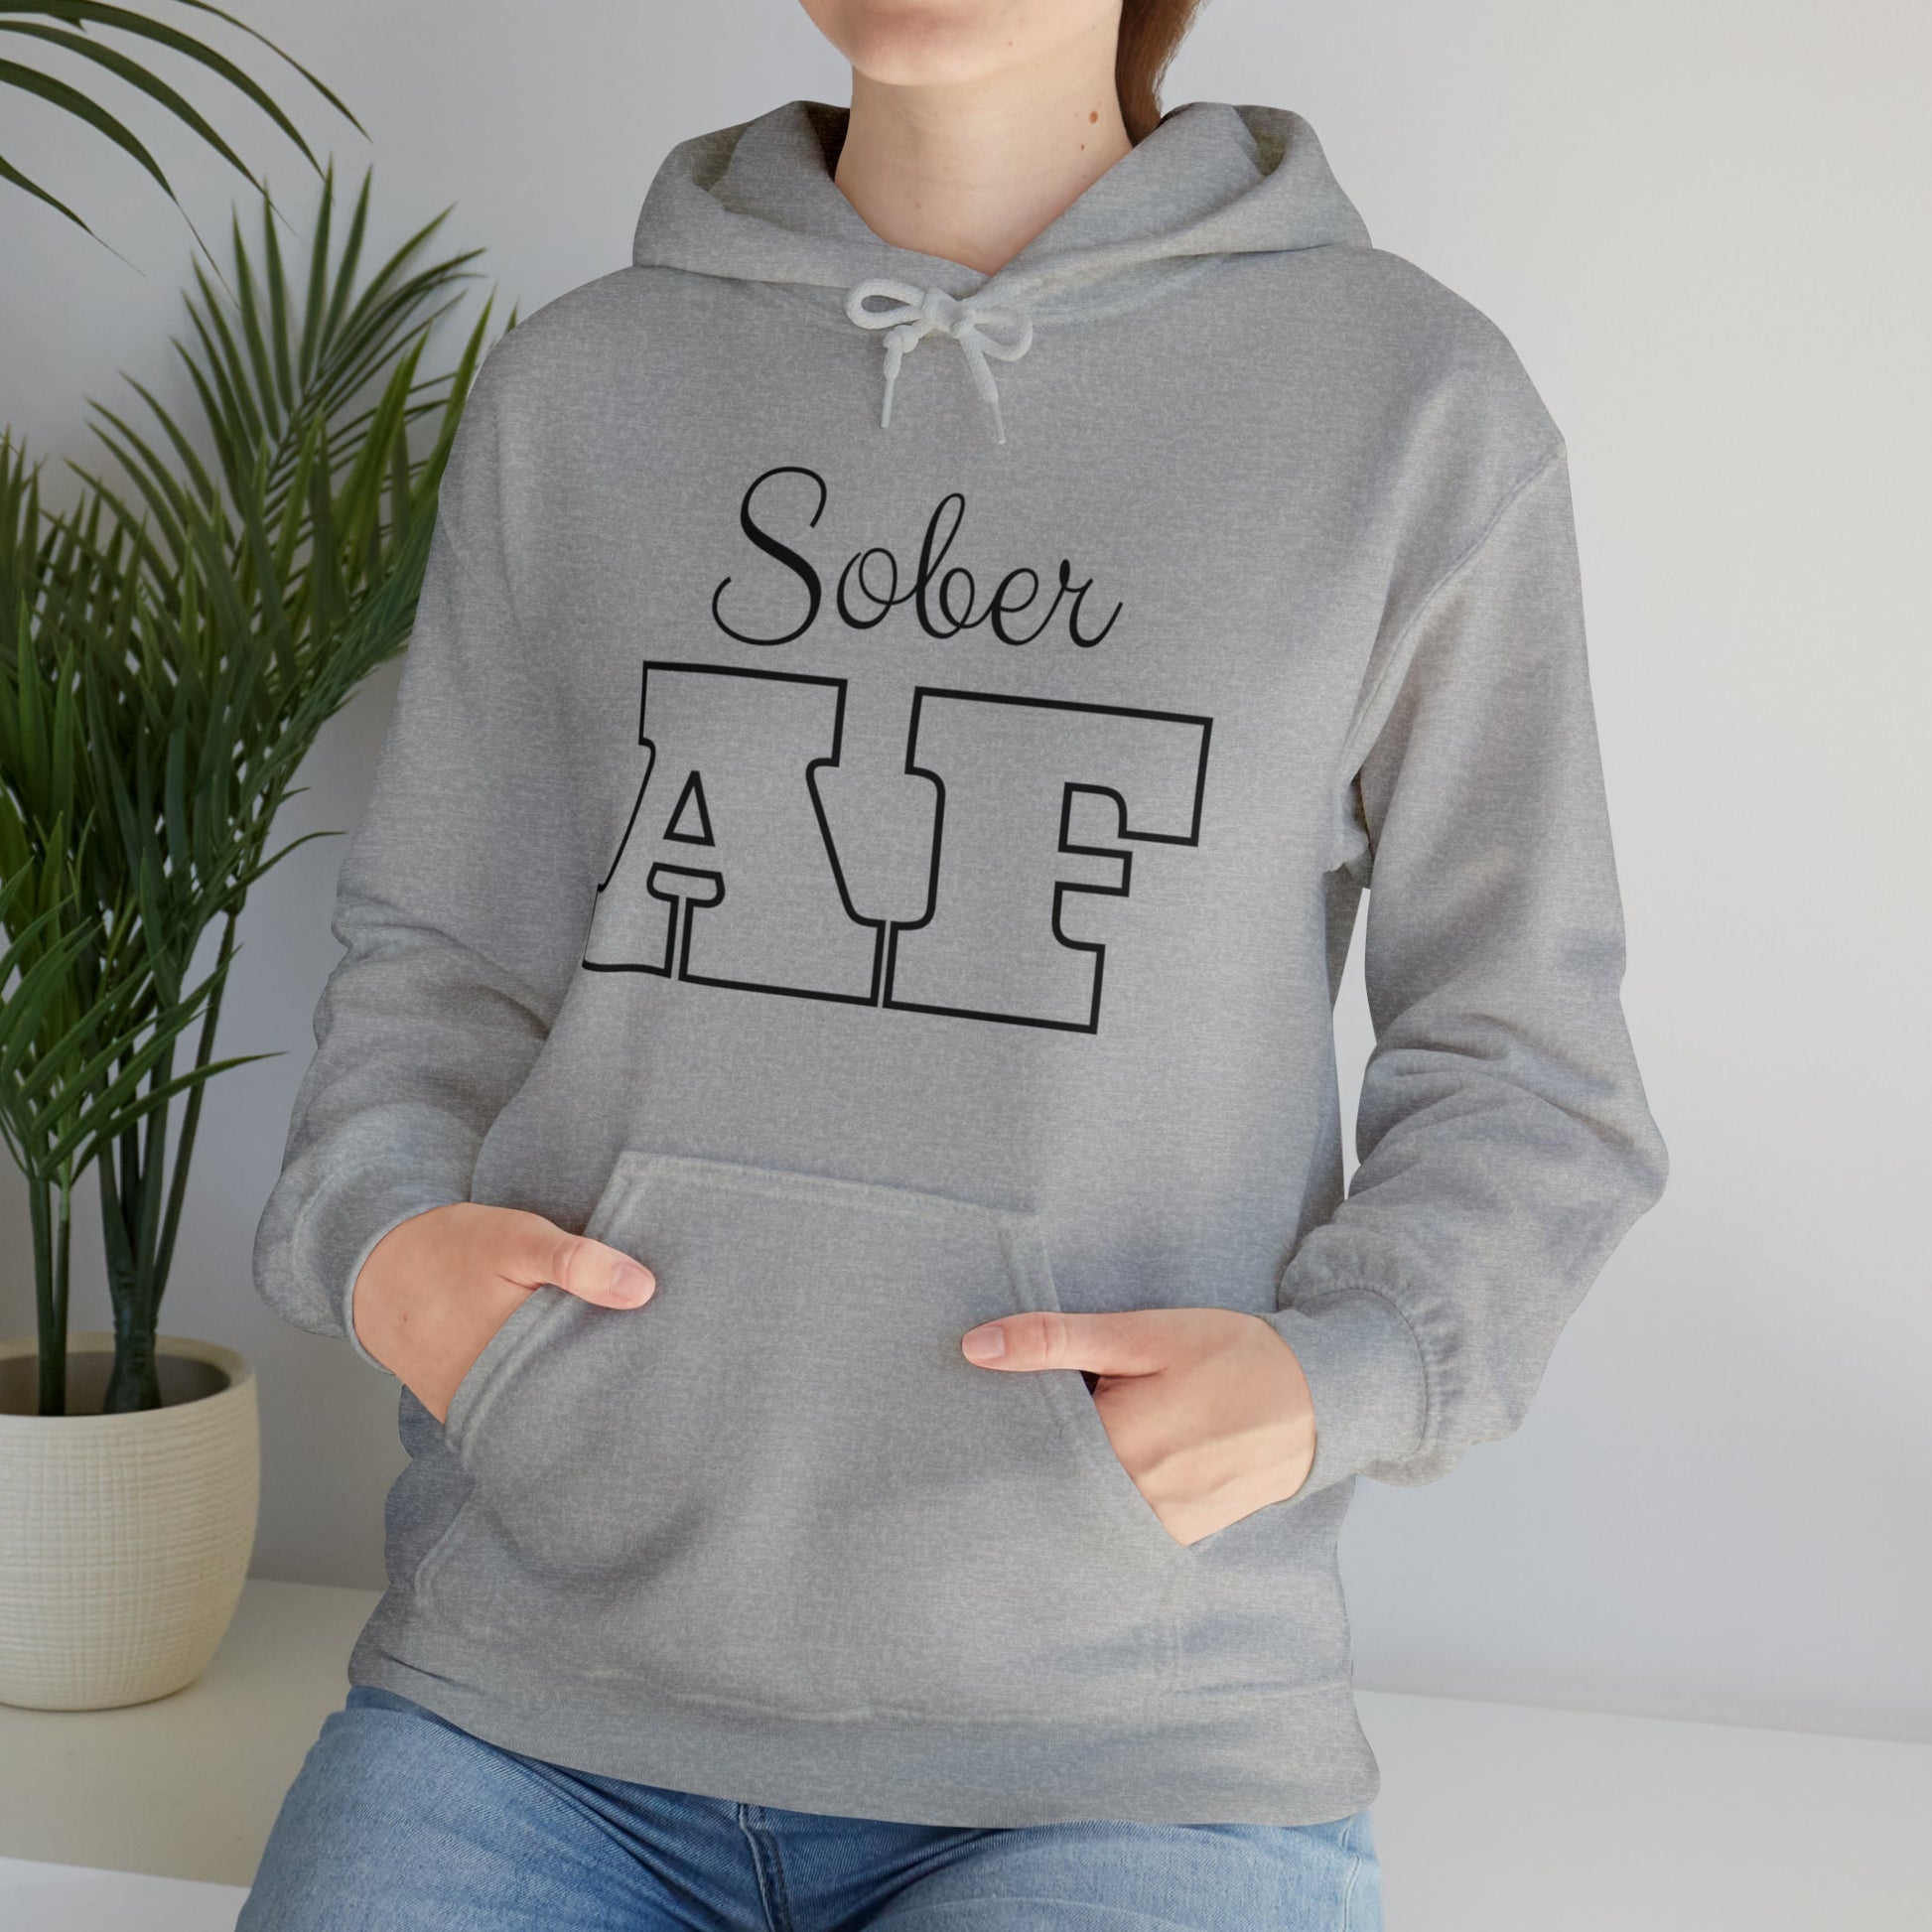 Sober AF Hoodie, Sobriety Pullover, Recovery Hooded Sweatshirt, Recovery Celebration Apparel, AA Shirts, Alcoholic Anonymous Sweatshirt - Grey